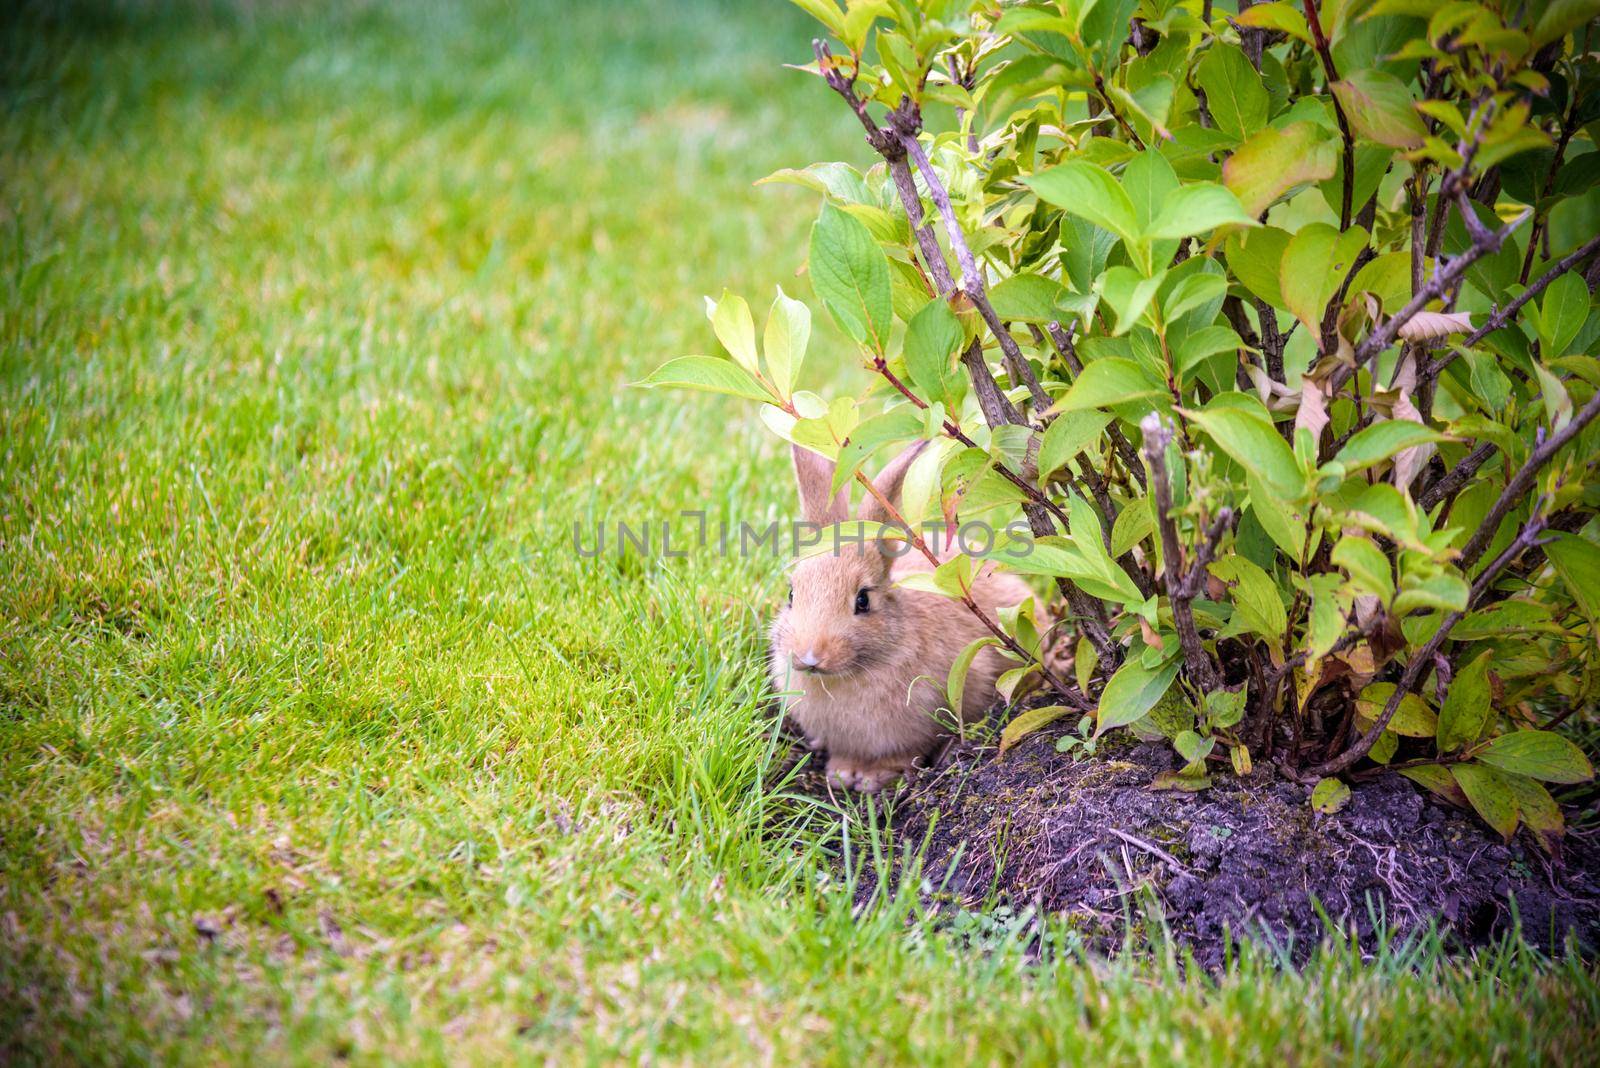 cute grey rabbit hiding under the green bushes in the park near the grass field under the sun.